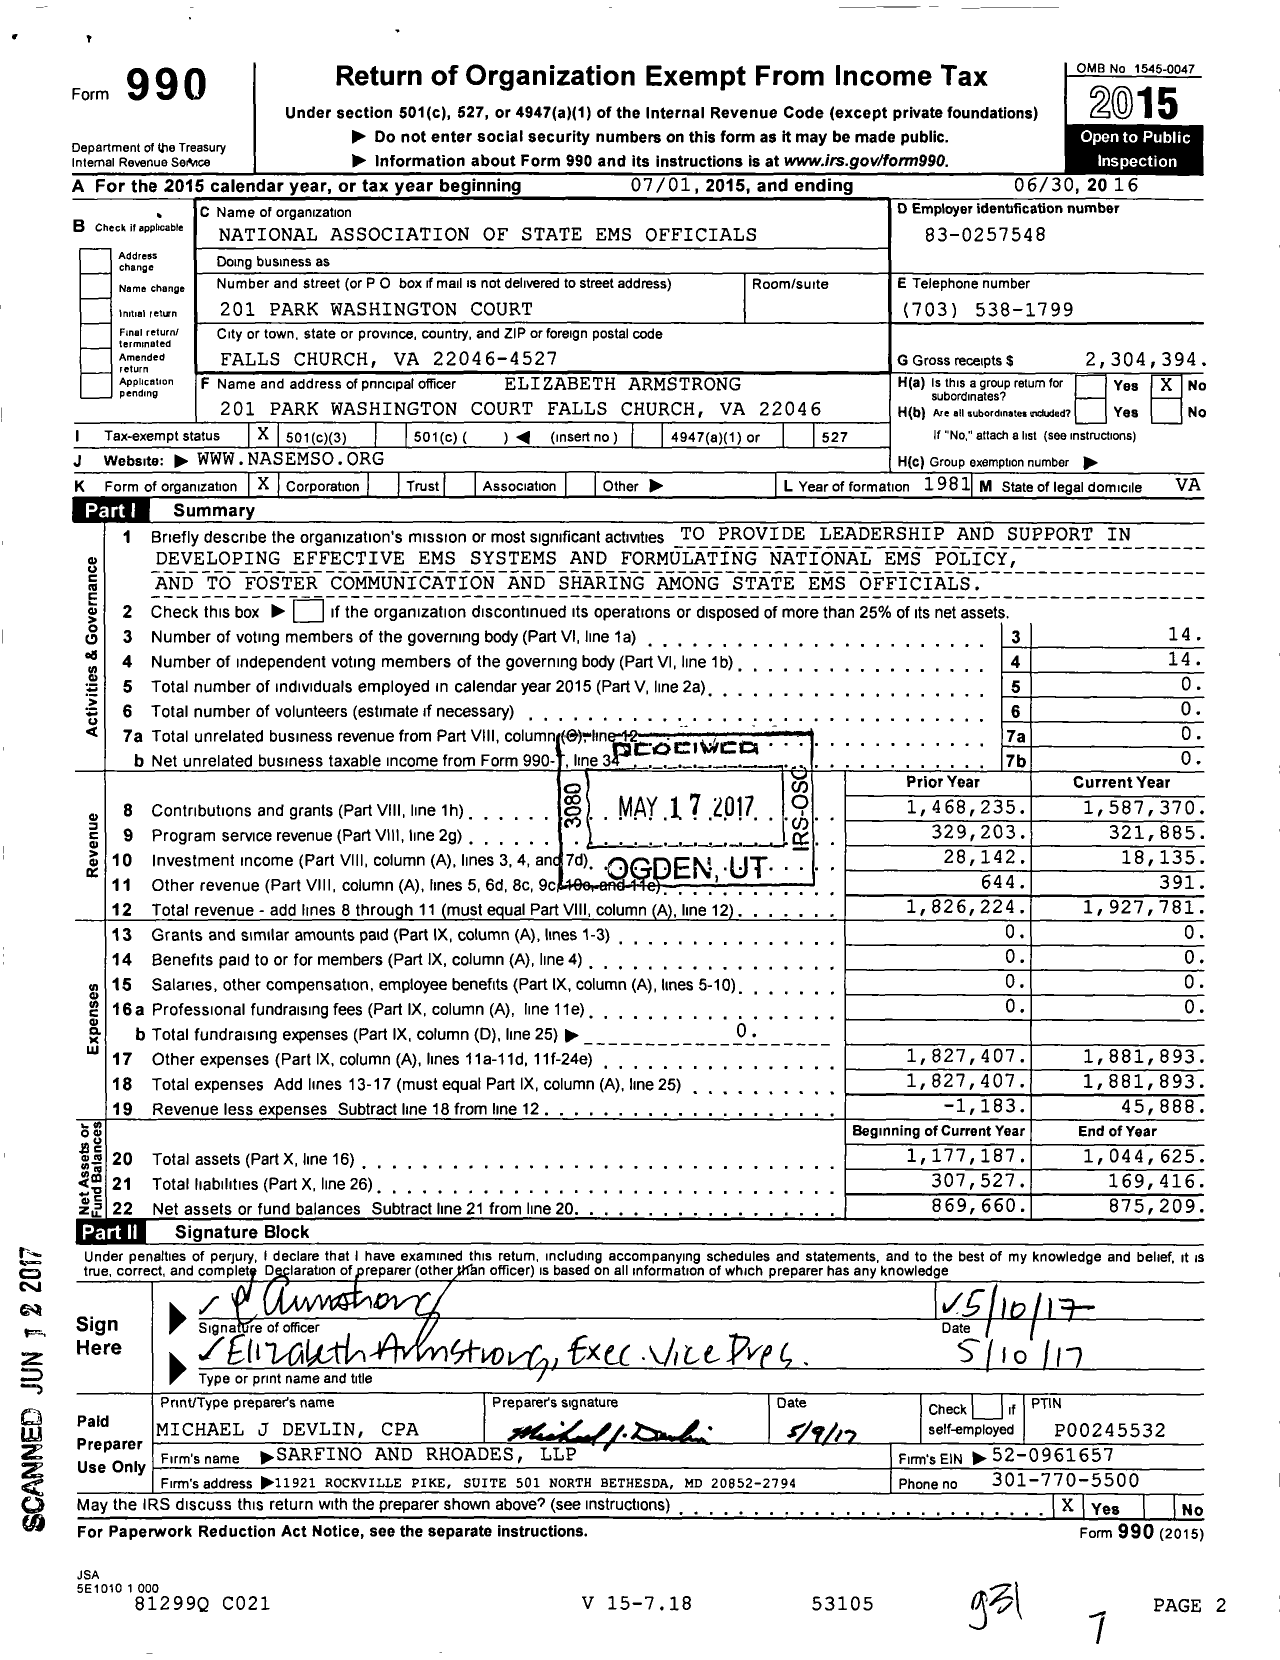 Image of first page of 2015 Form 990 for National Association of State EMS Officials (NASEMSO)